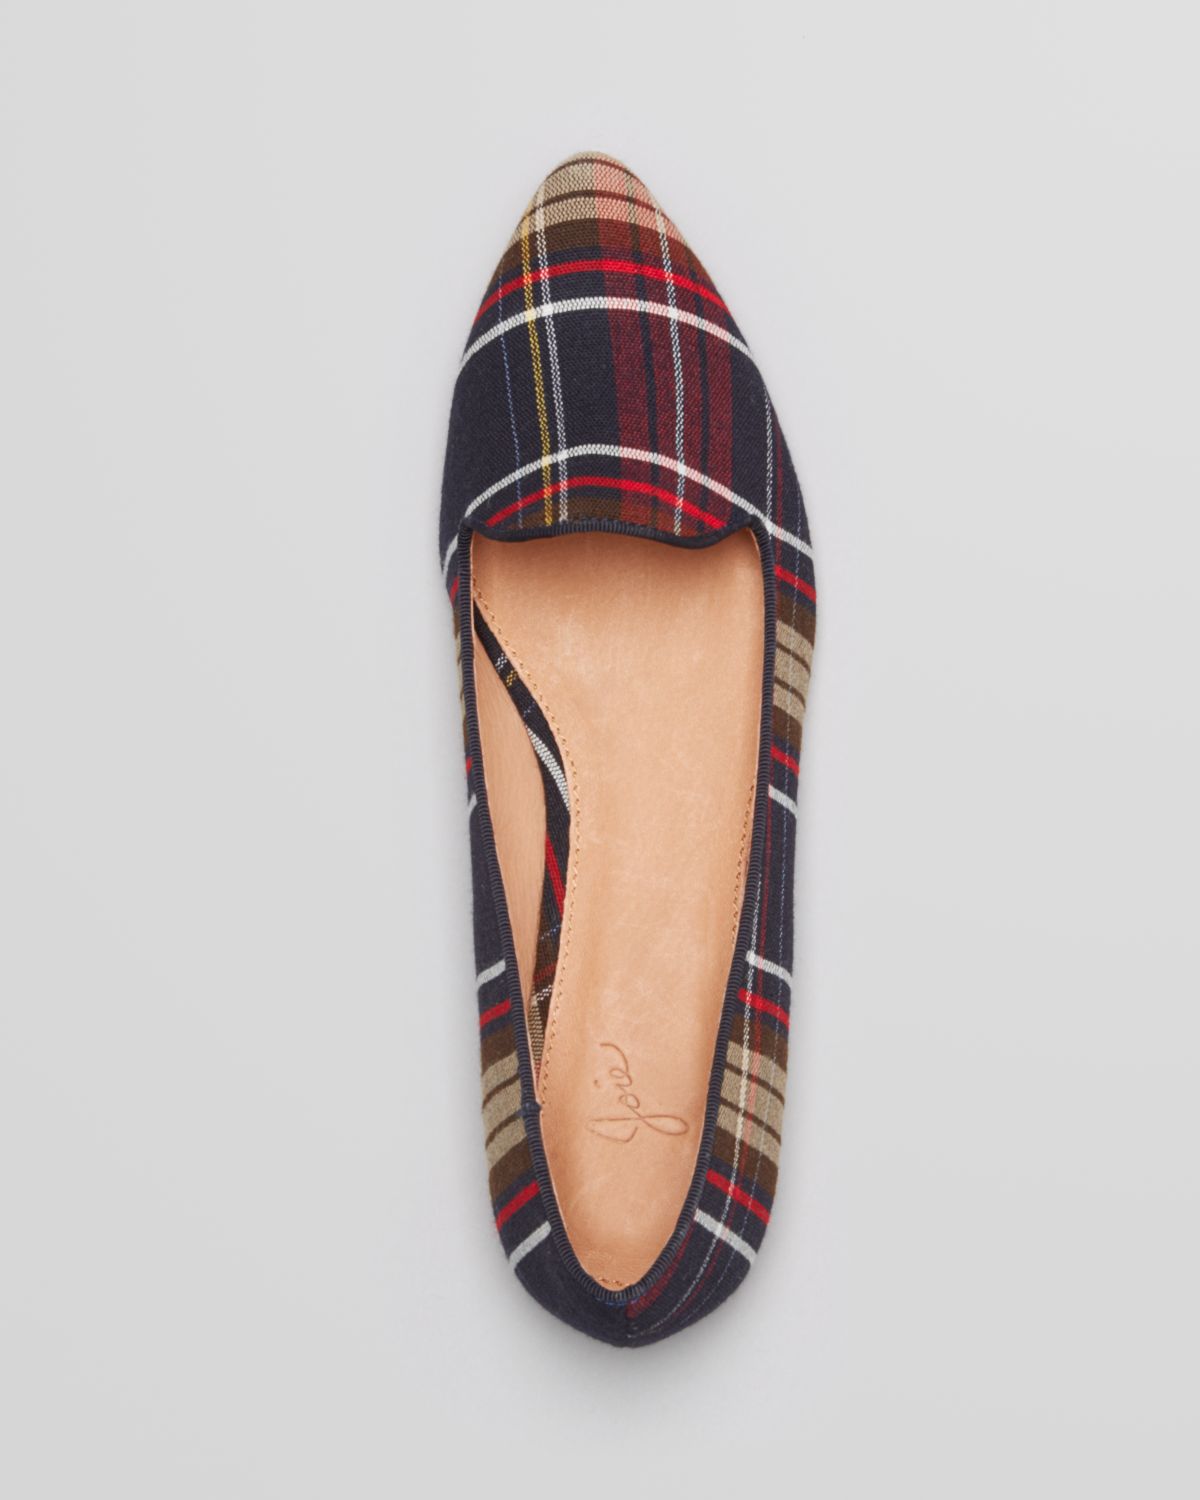 Joie Pointed Toe Smoking Flats Day 